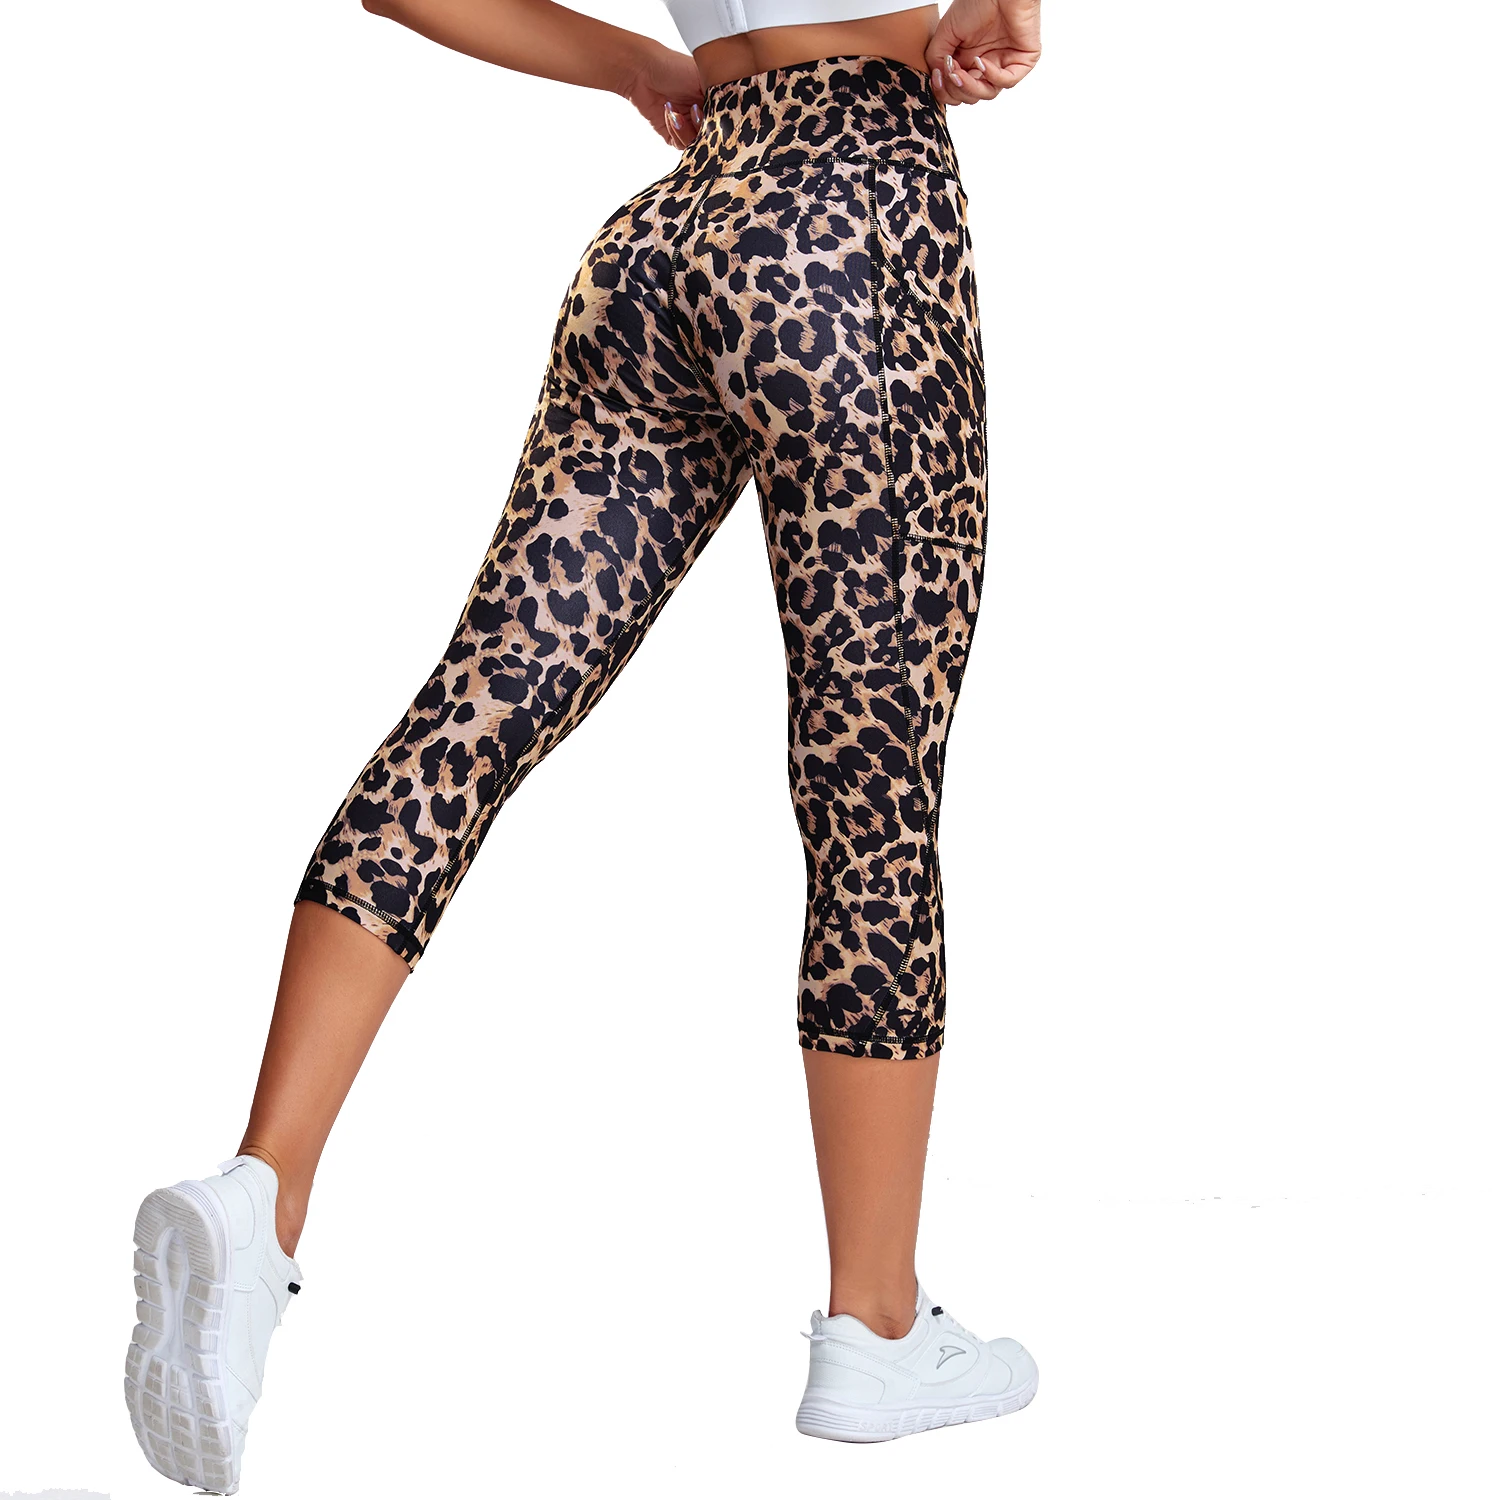 High Waist Yoga Pants For Women - Compression Leggings For Fitness & Gym